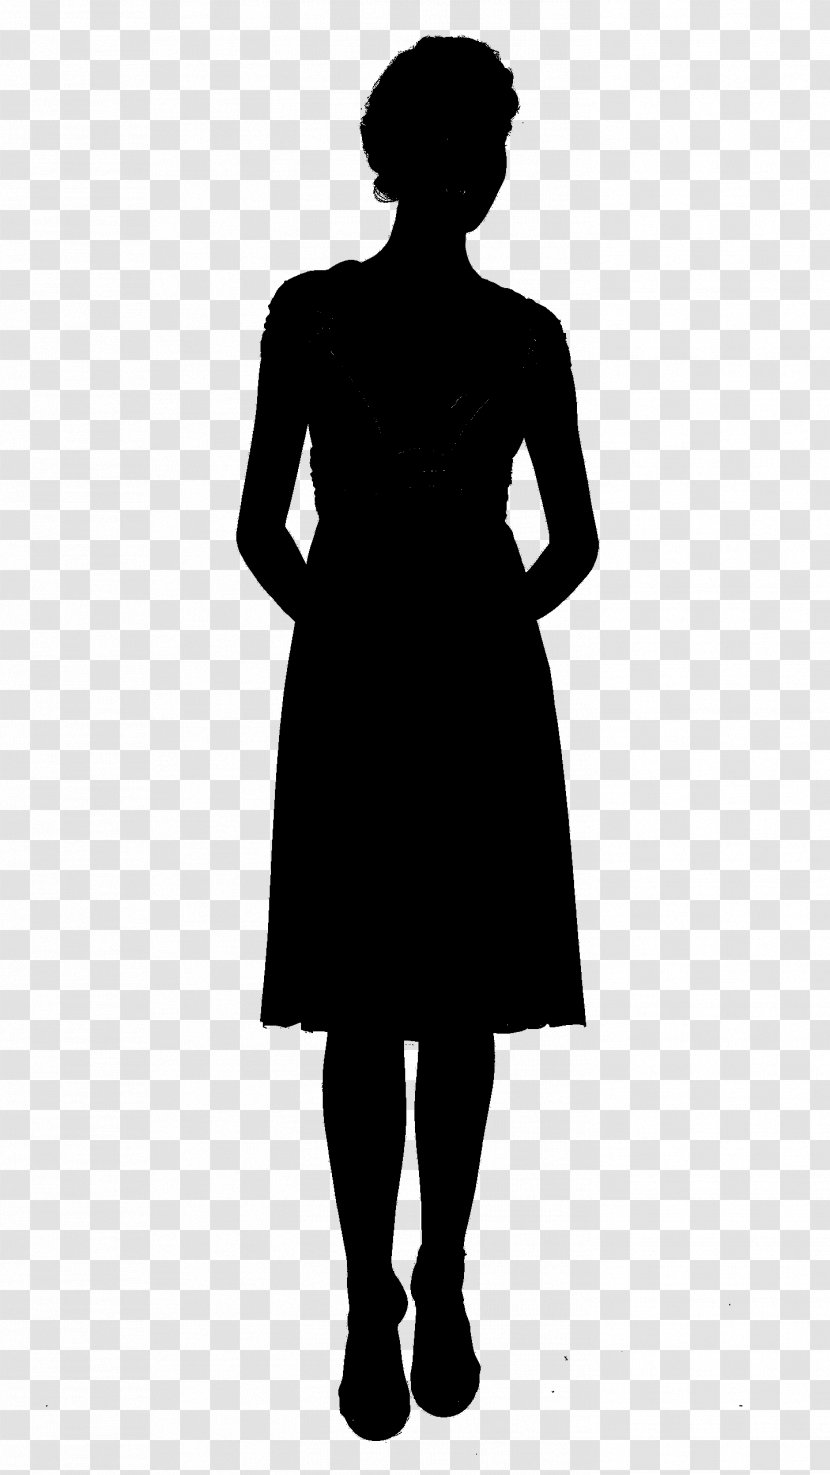 Silhouette Image Photography - Blackandwhite - Formal Wear Transparent PNG